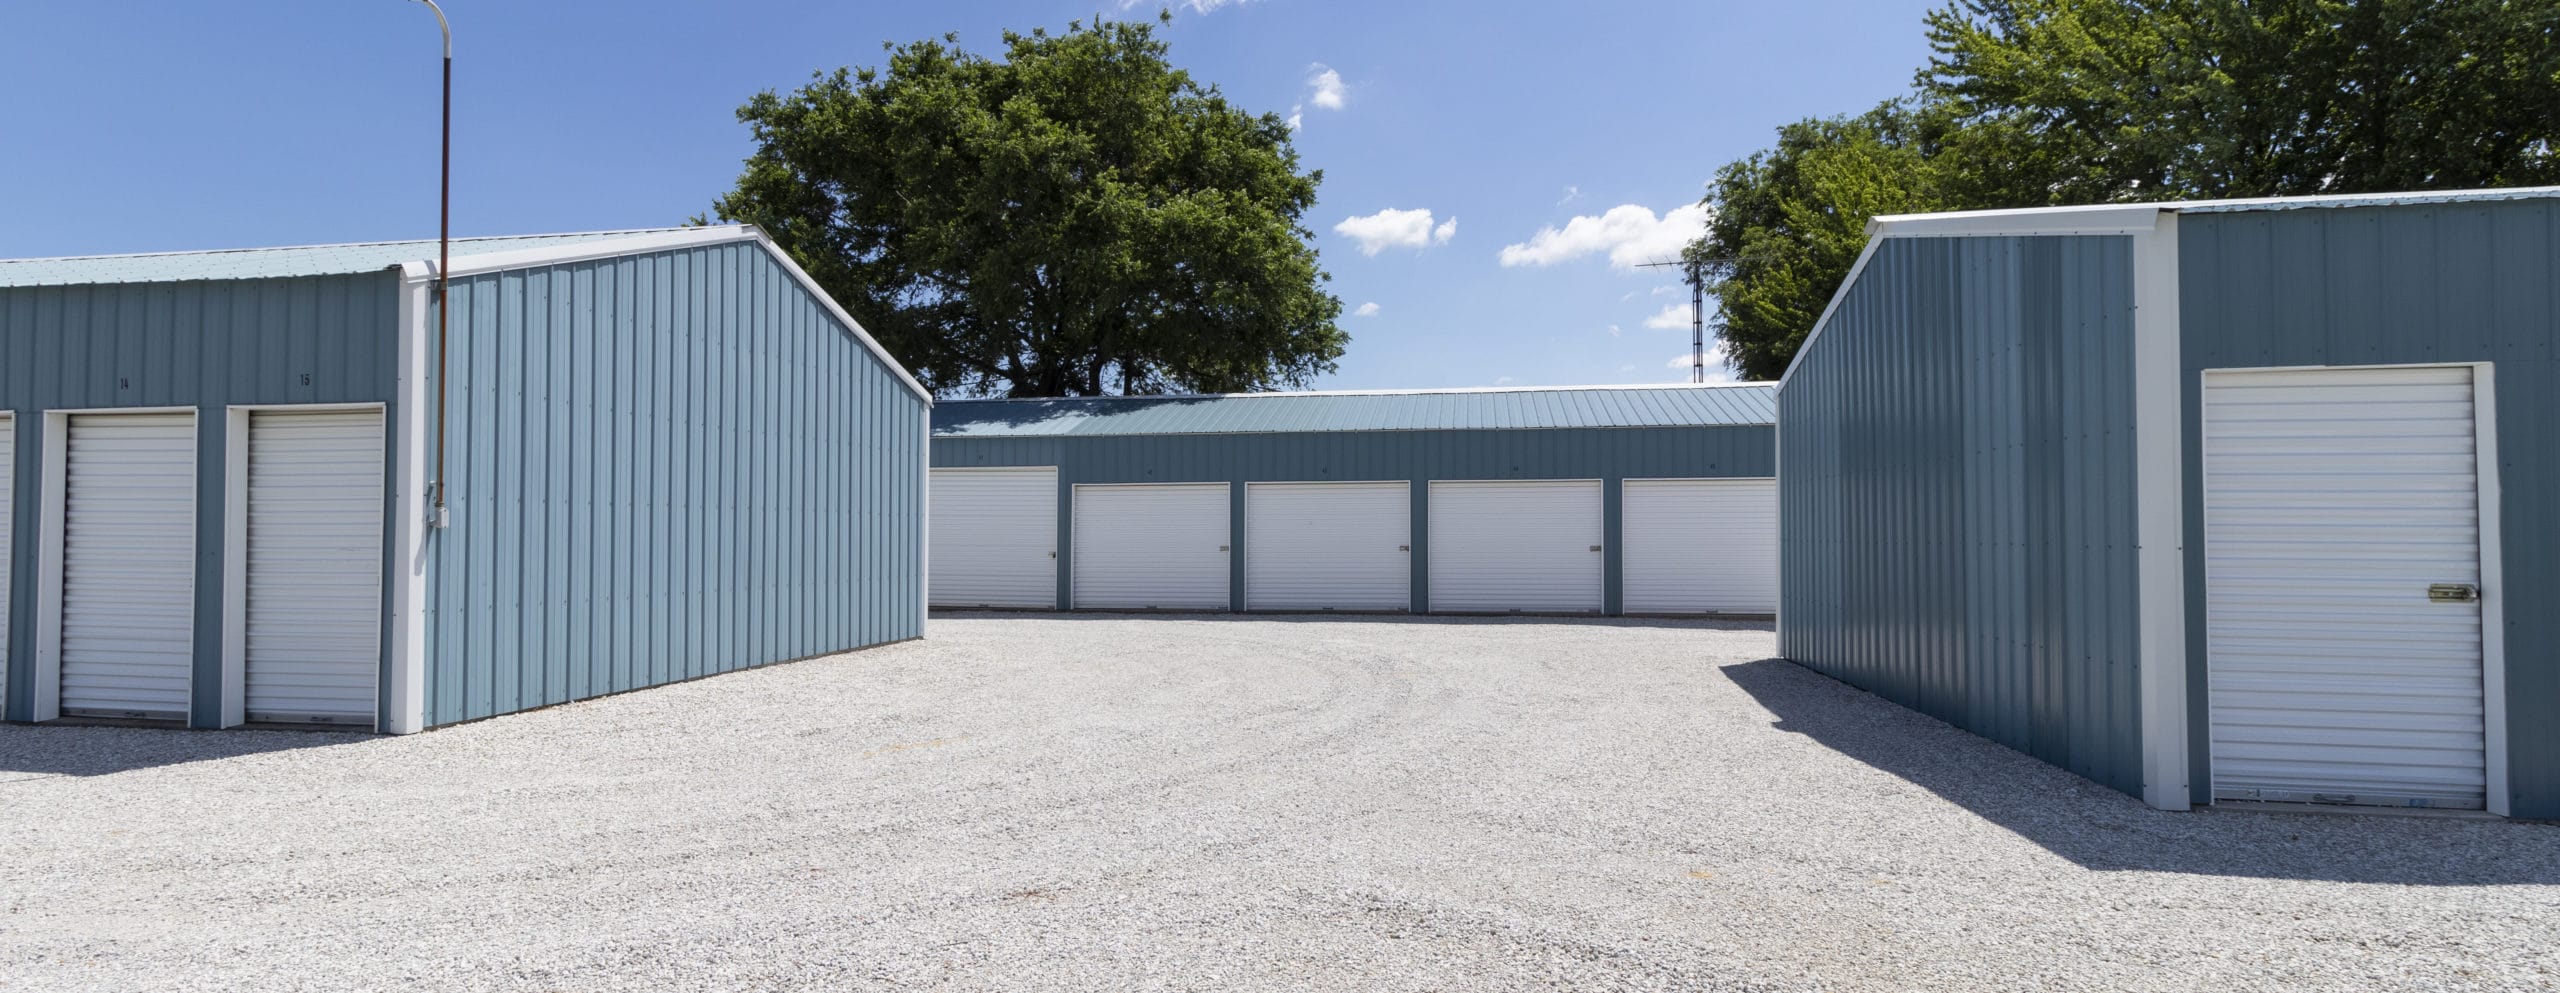 Storage units with closed garage doors